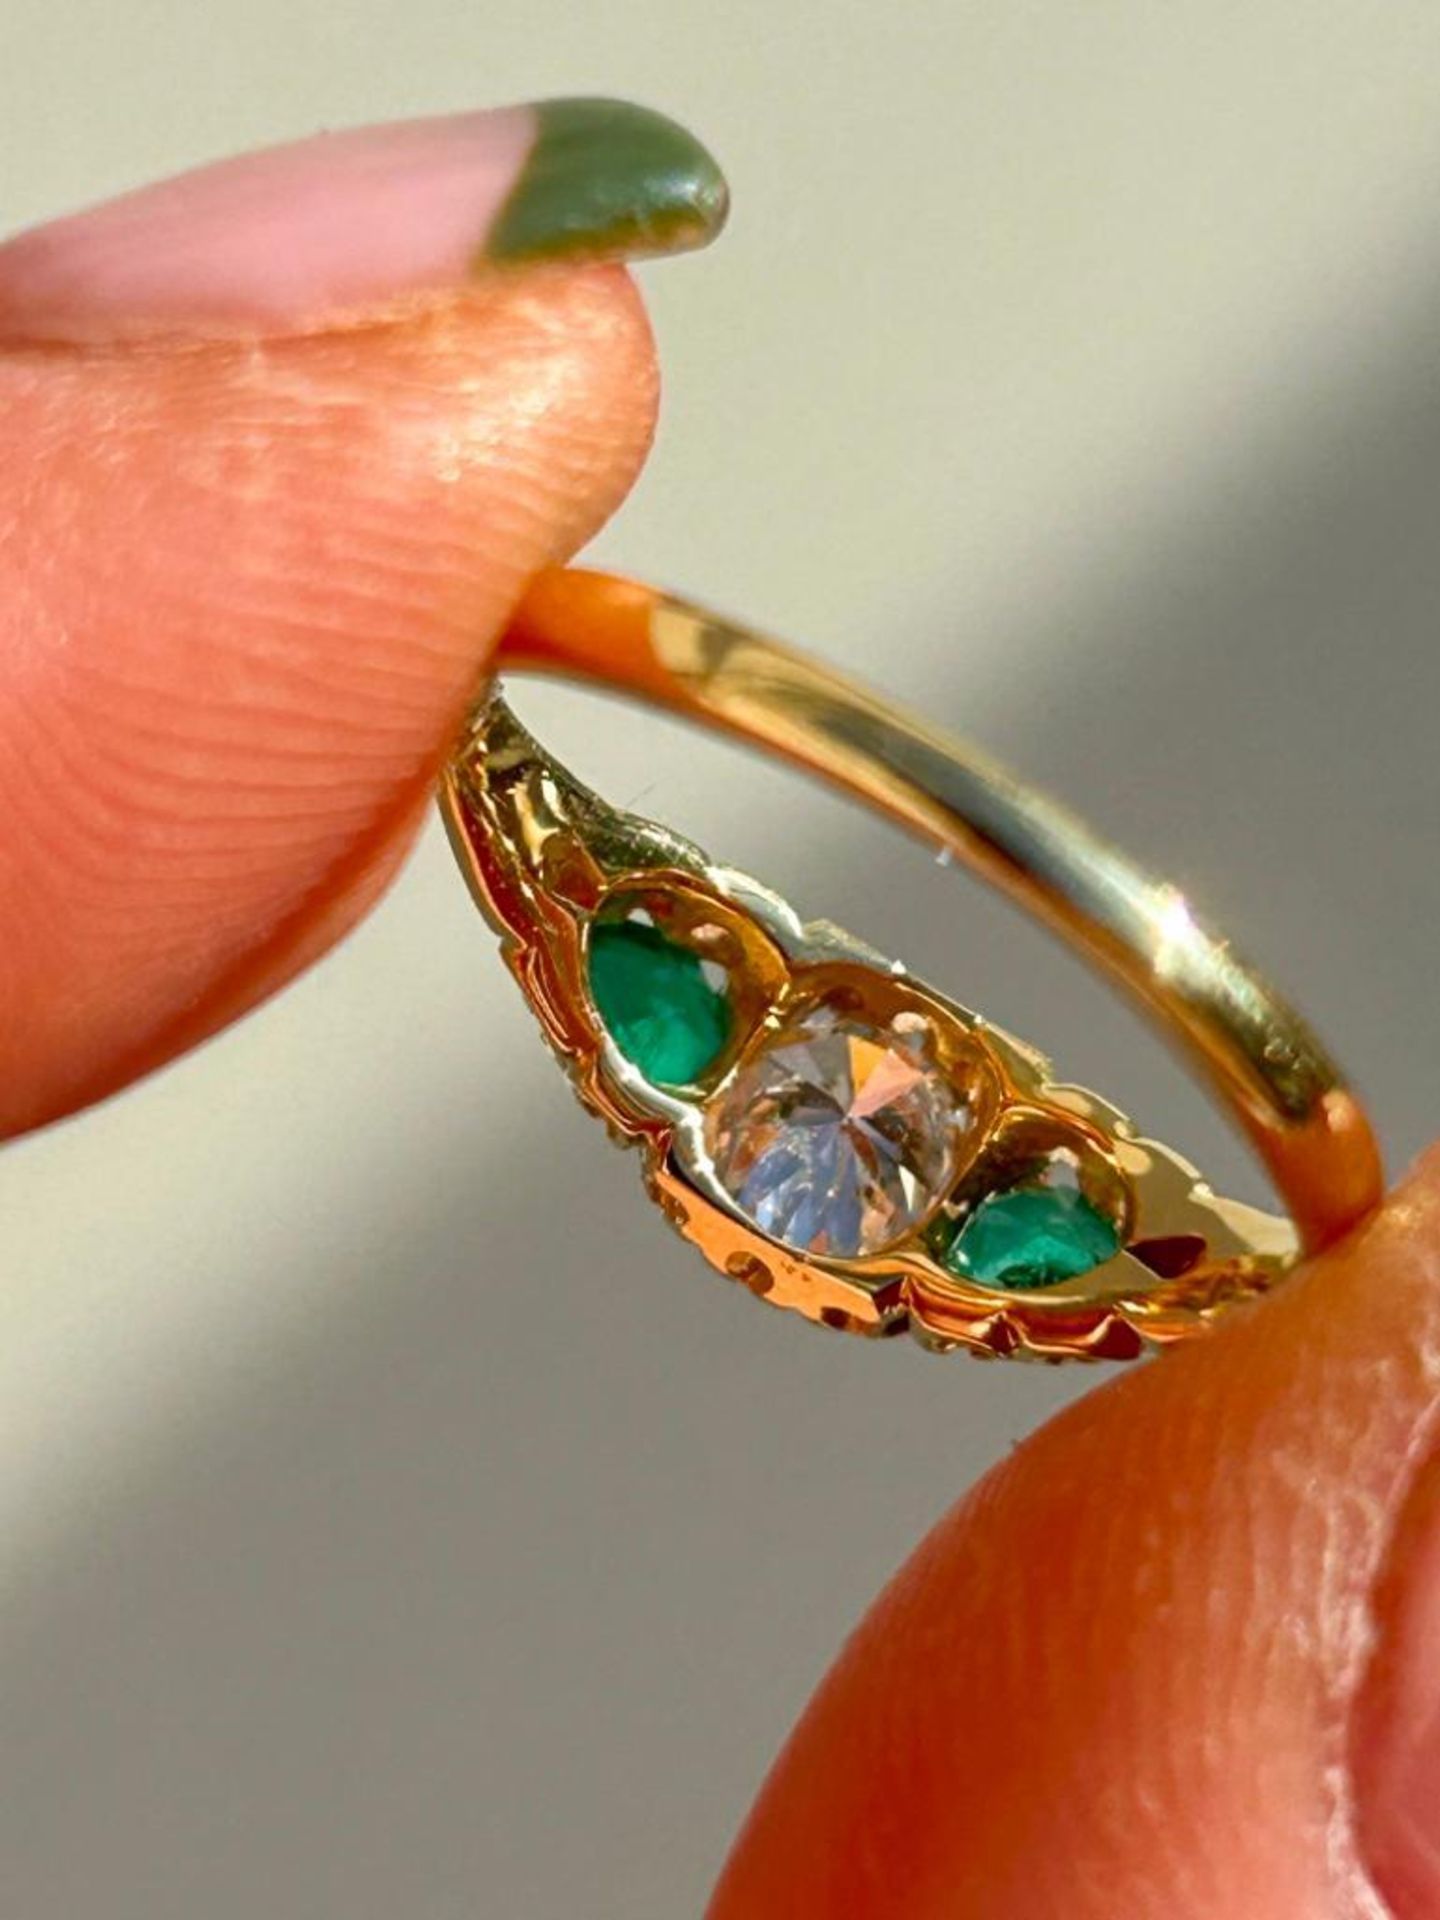 Antique 18ct Yellow Gold 3 Stone Emerald and Diamond Ring - Image 4 of 6